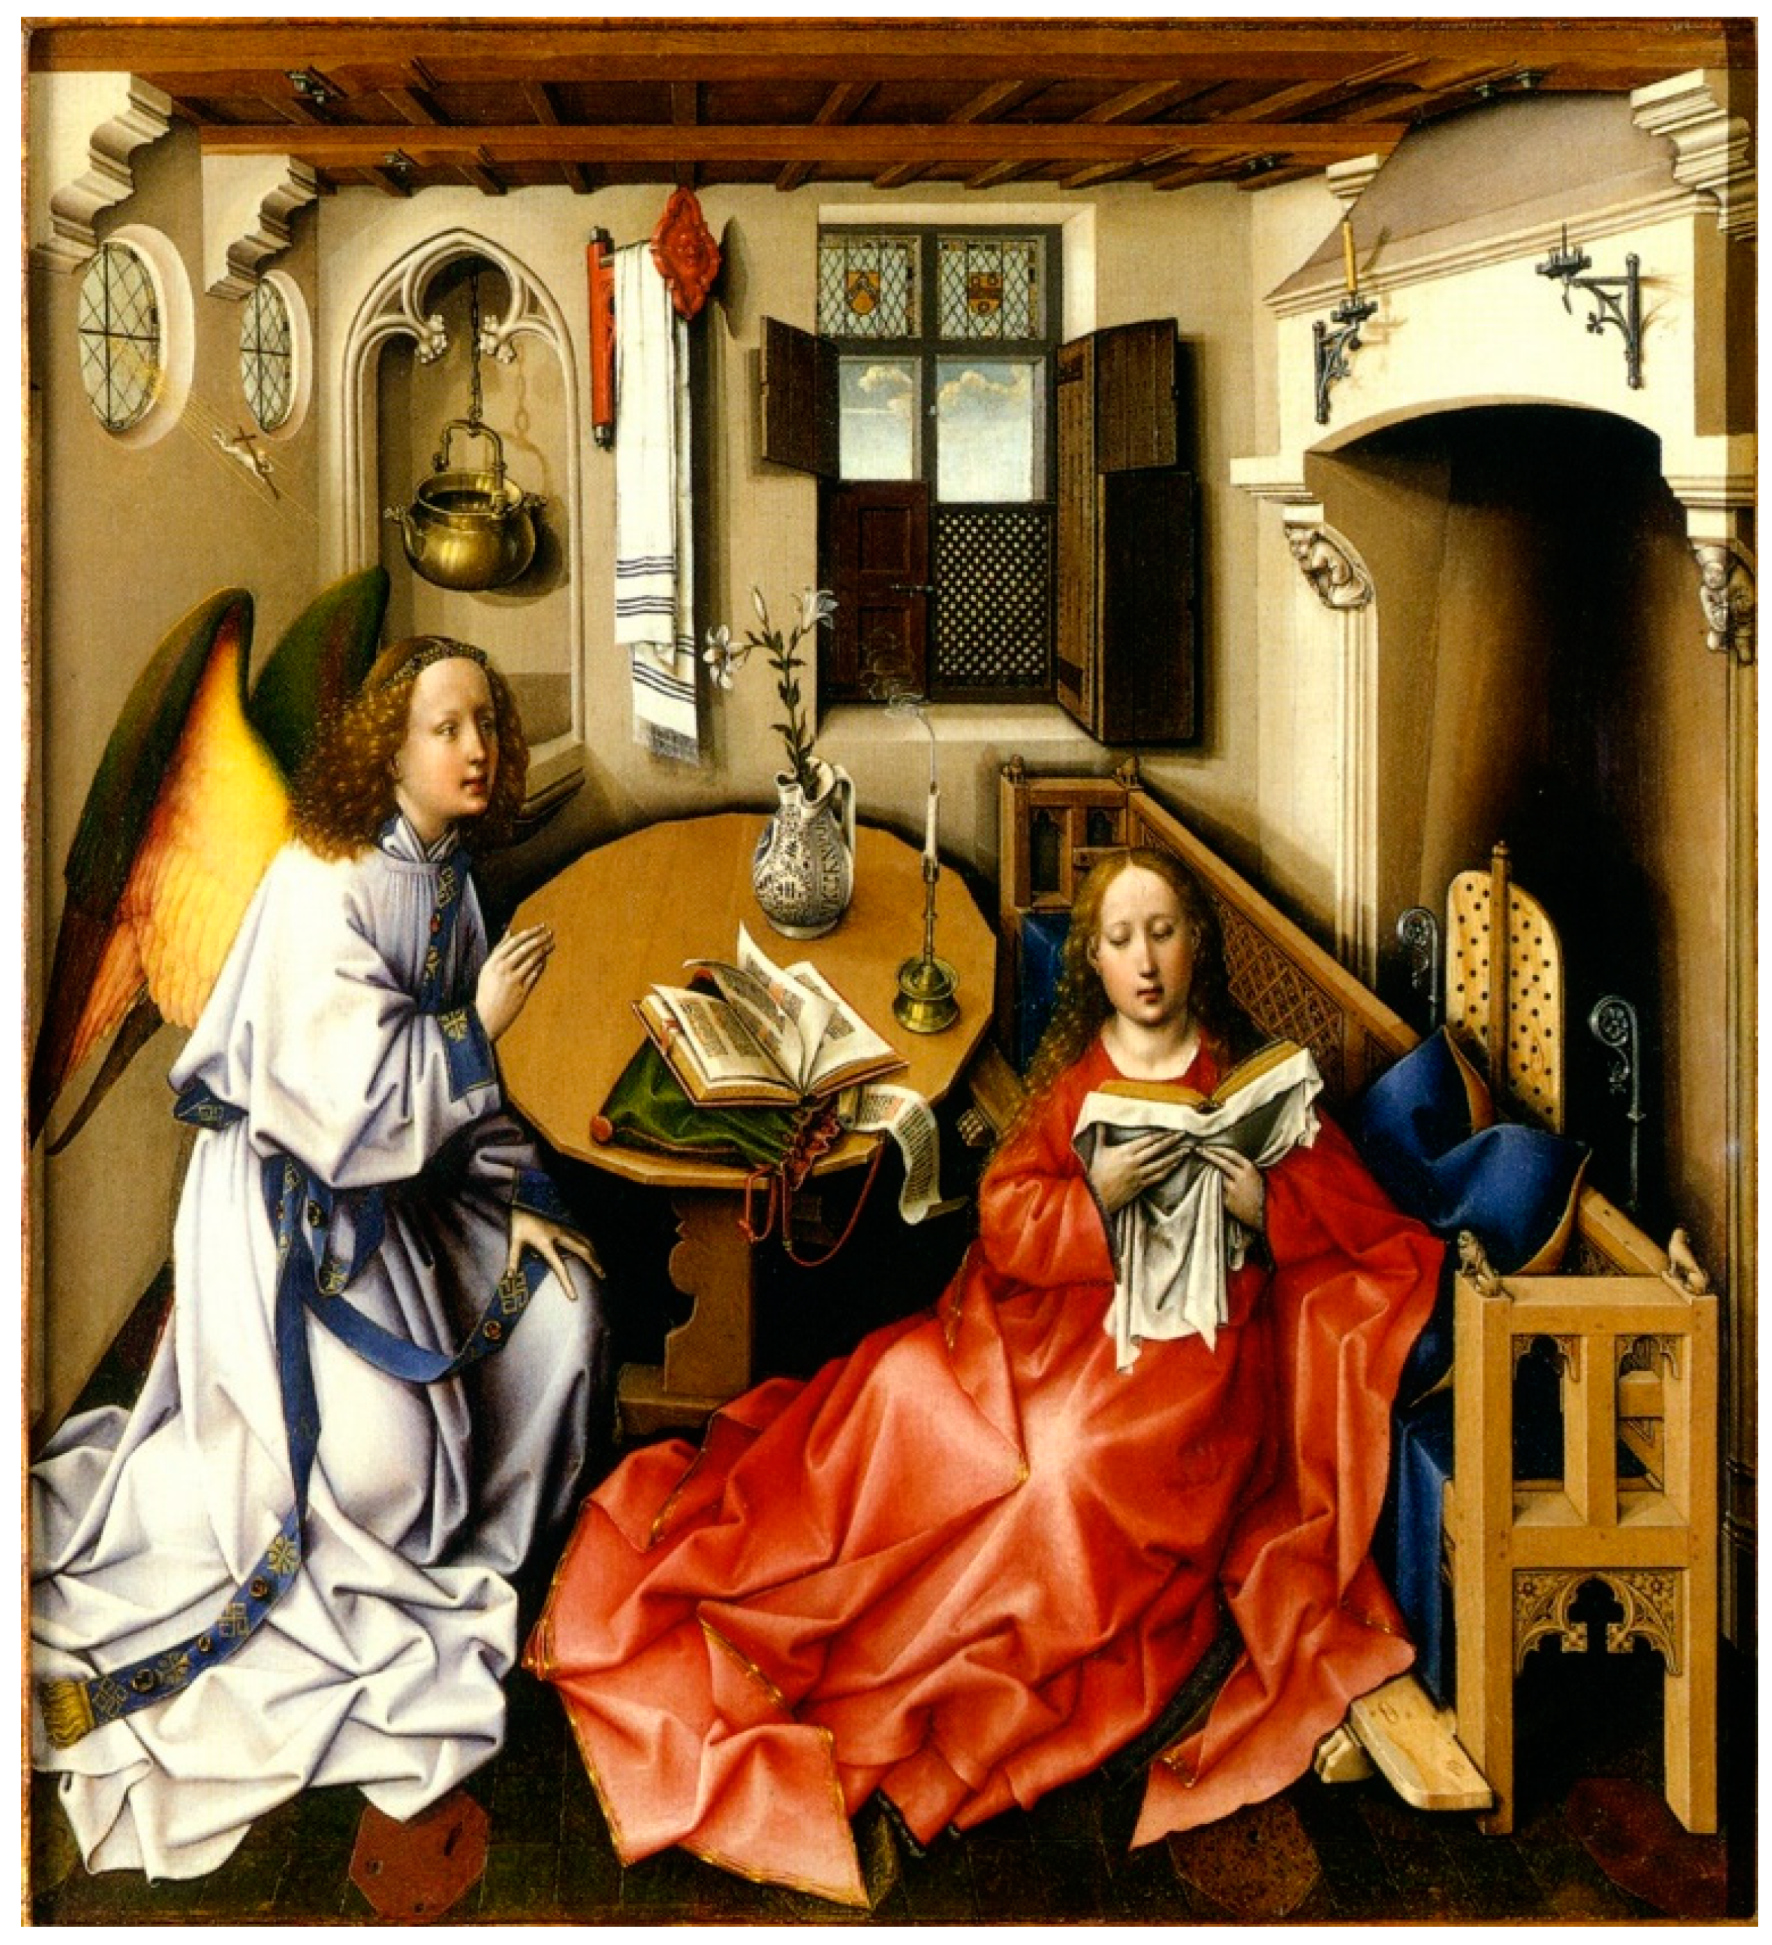 Religions Free Full-Text The Vase in Paintings of the Annunciation, a Polyvalent Symbol of the Virgin Mary